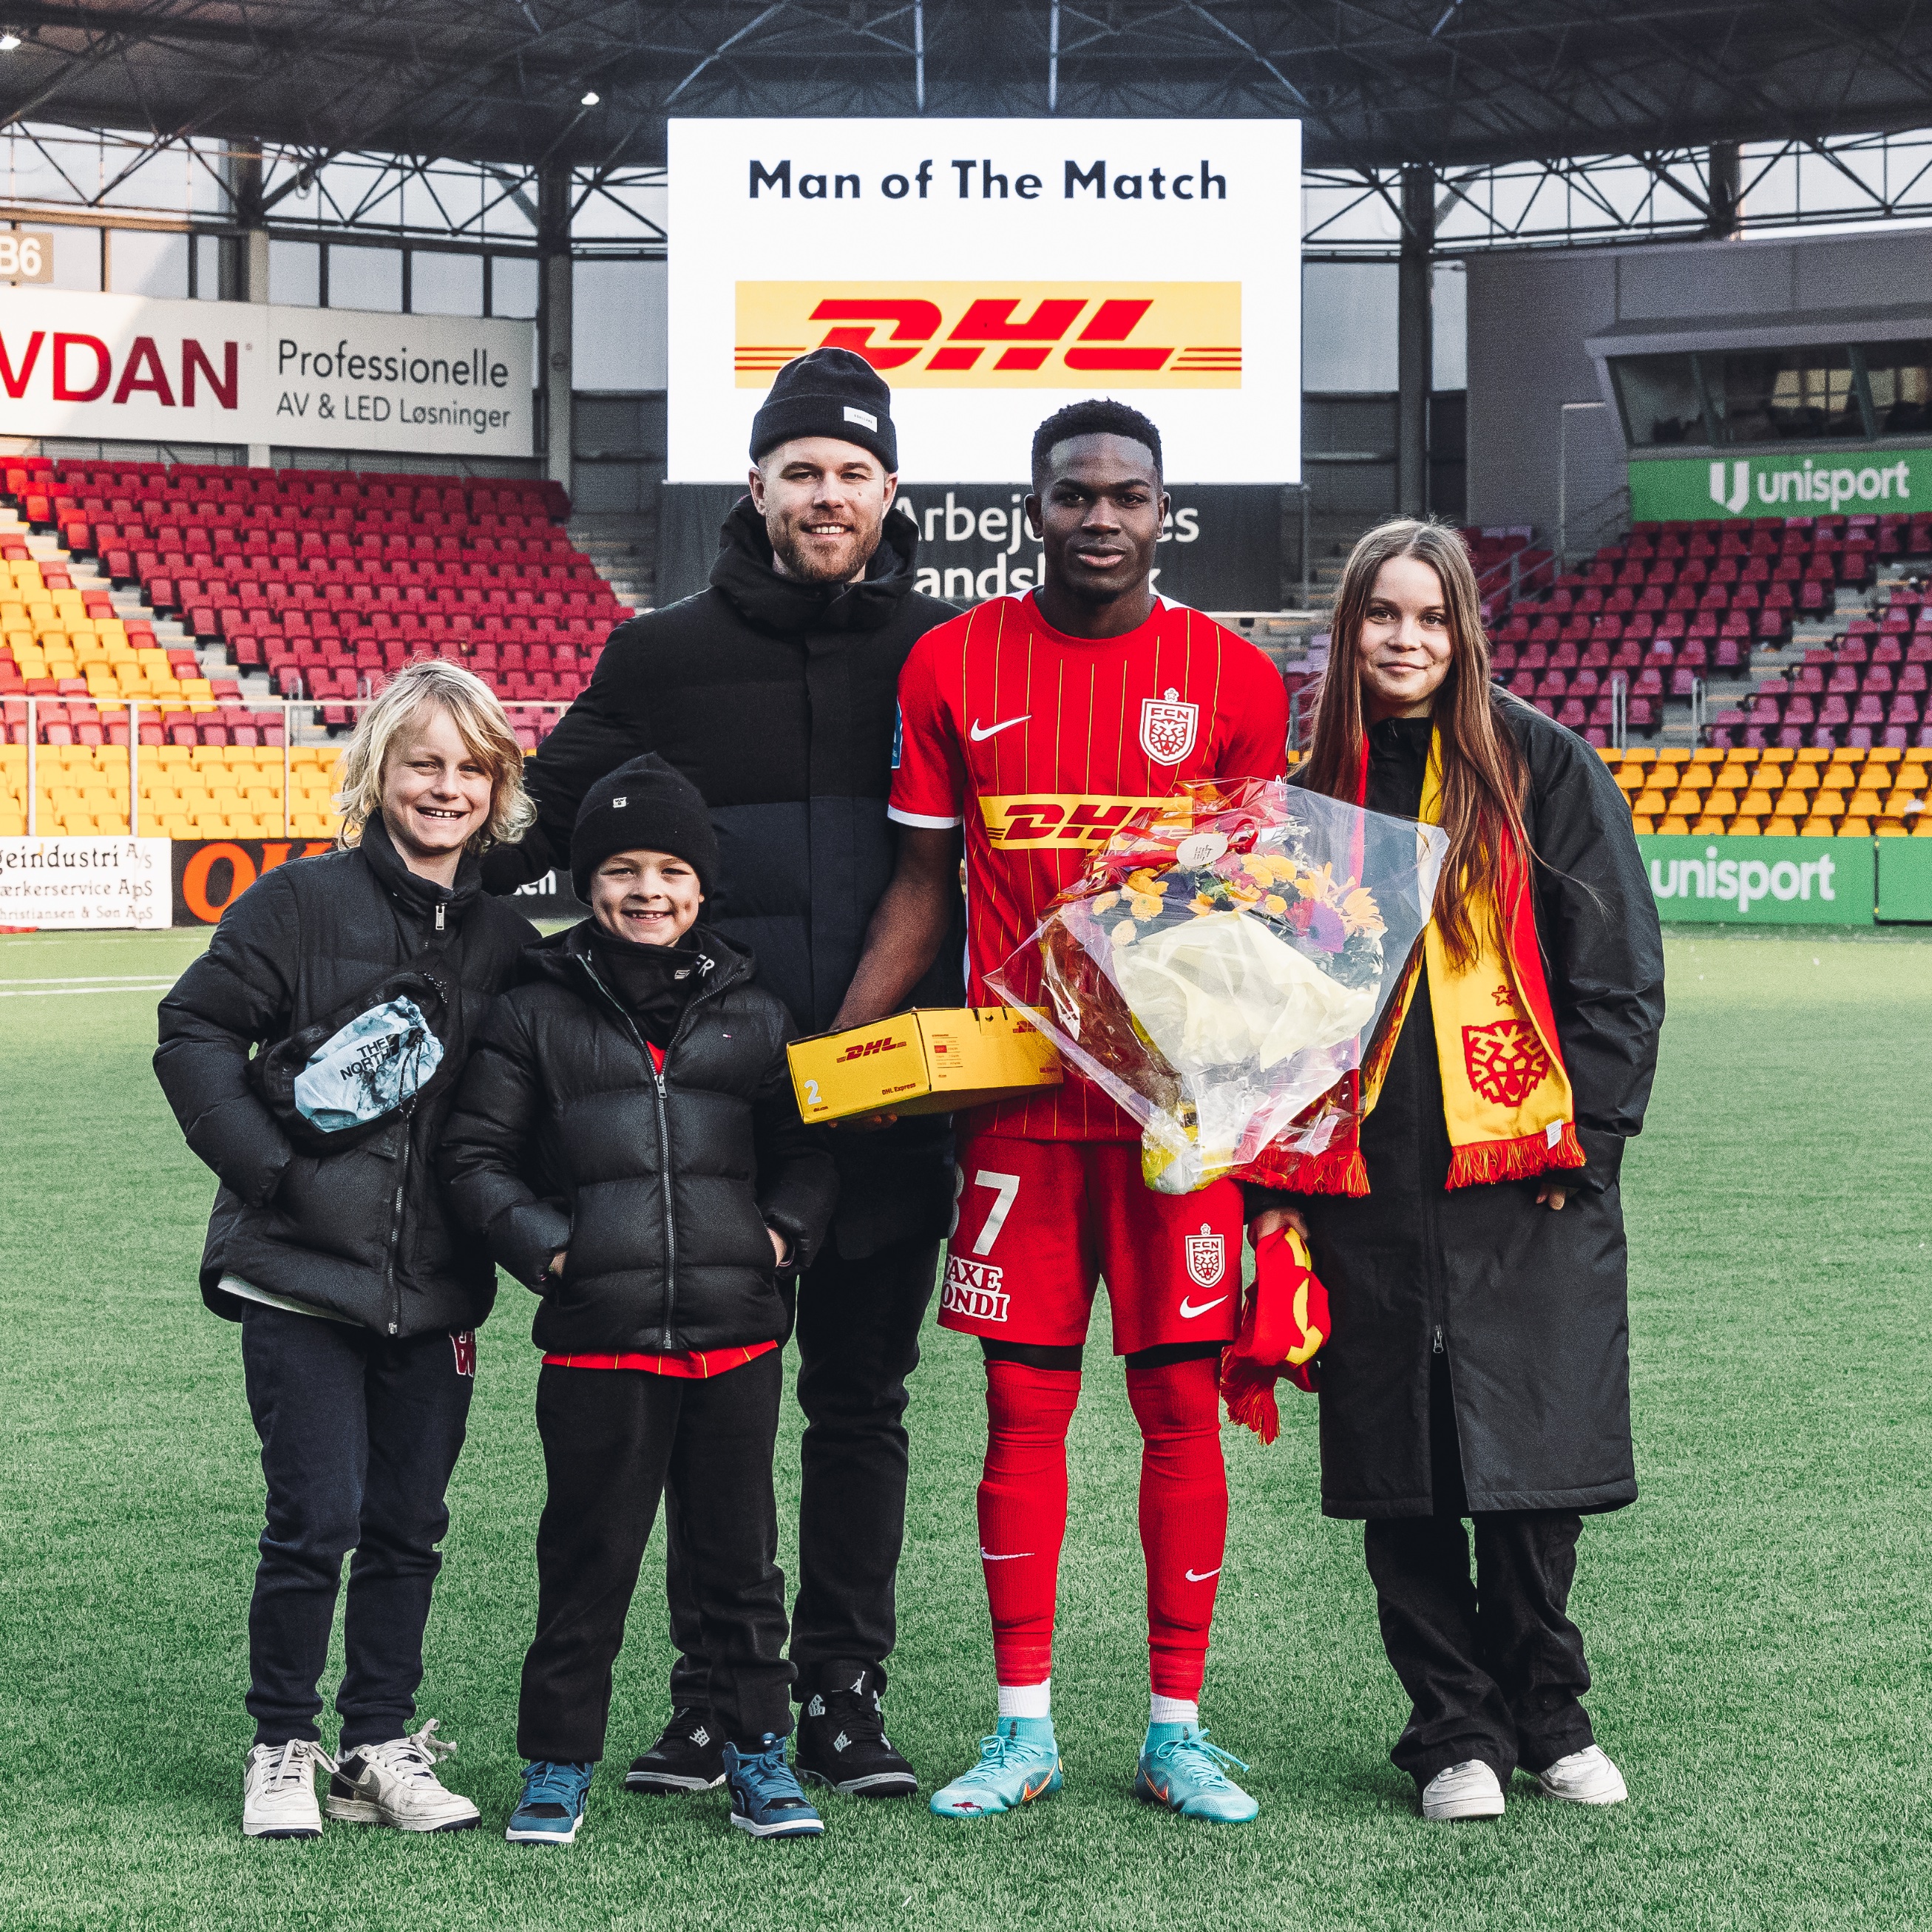 Ghanaian youngster Ernest Nuamah named MoTM after hitting brace to lead FC Nordsjaelland to victory